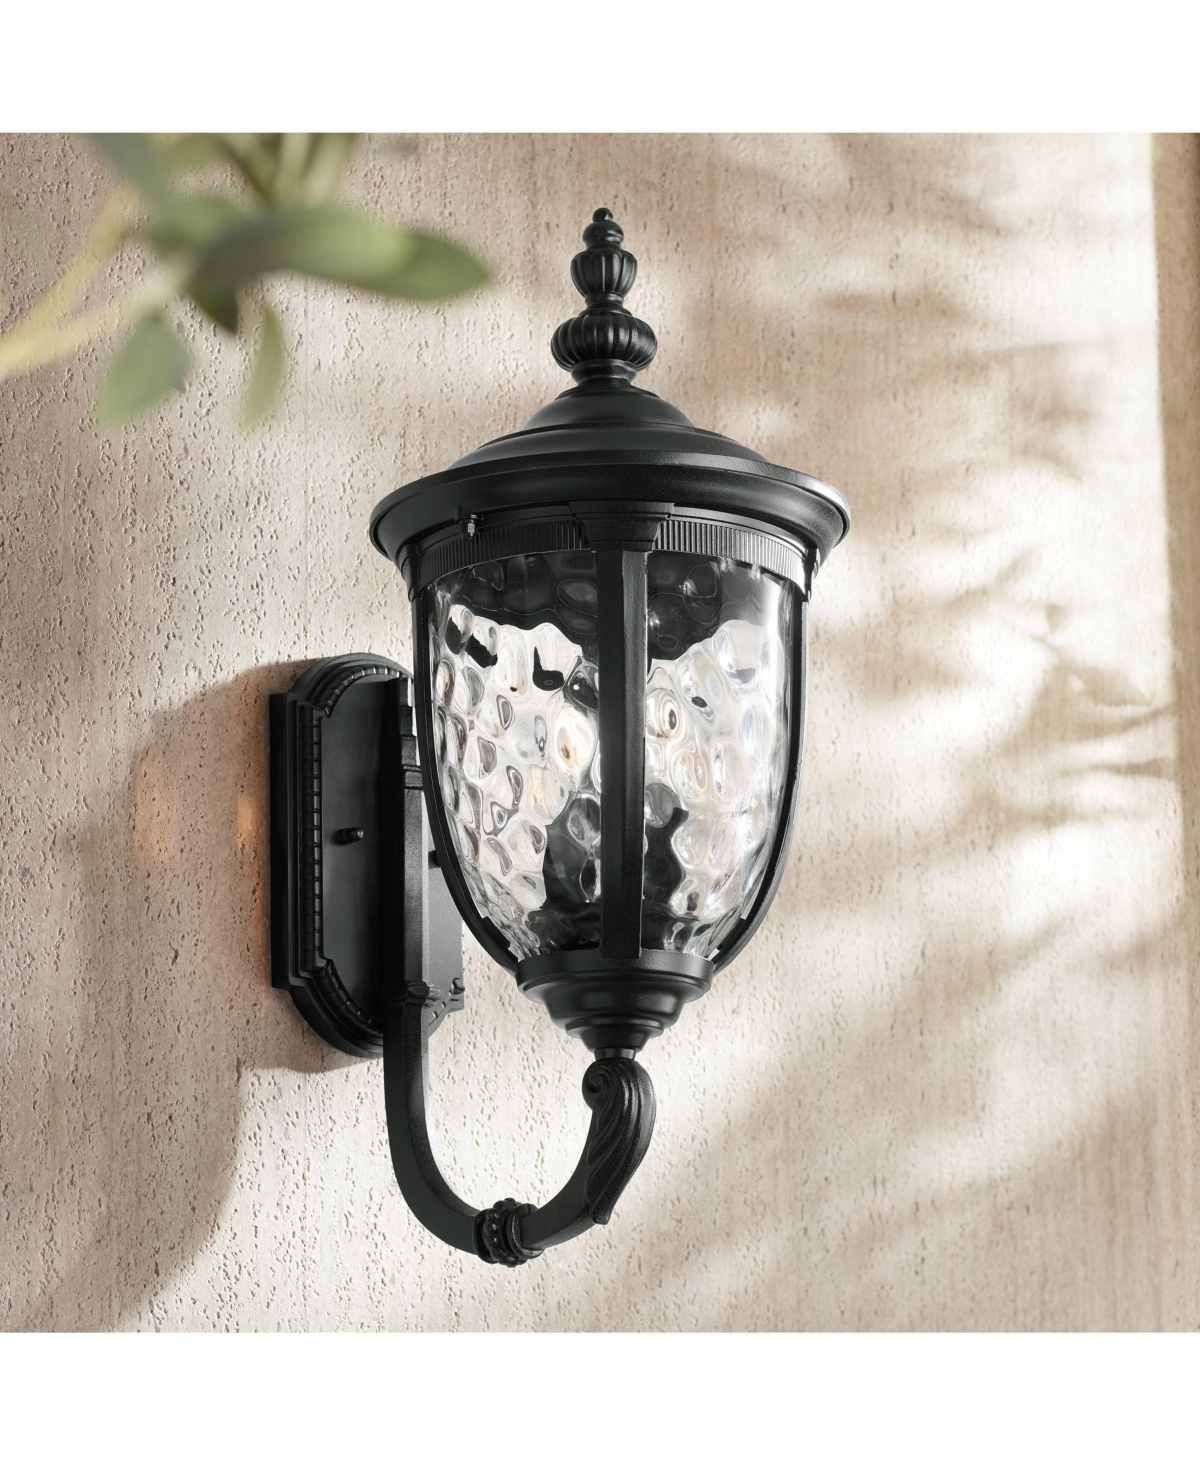 Bellagio European Outdoor Wall Light Fixture Textured Black 21" Clear Hammered Glass Up bridge Arm for Exterior House Porch Patio Outside Deck Garage